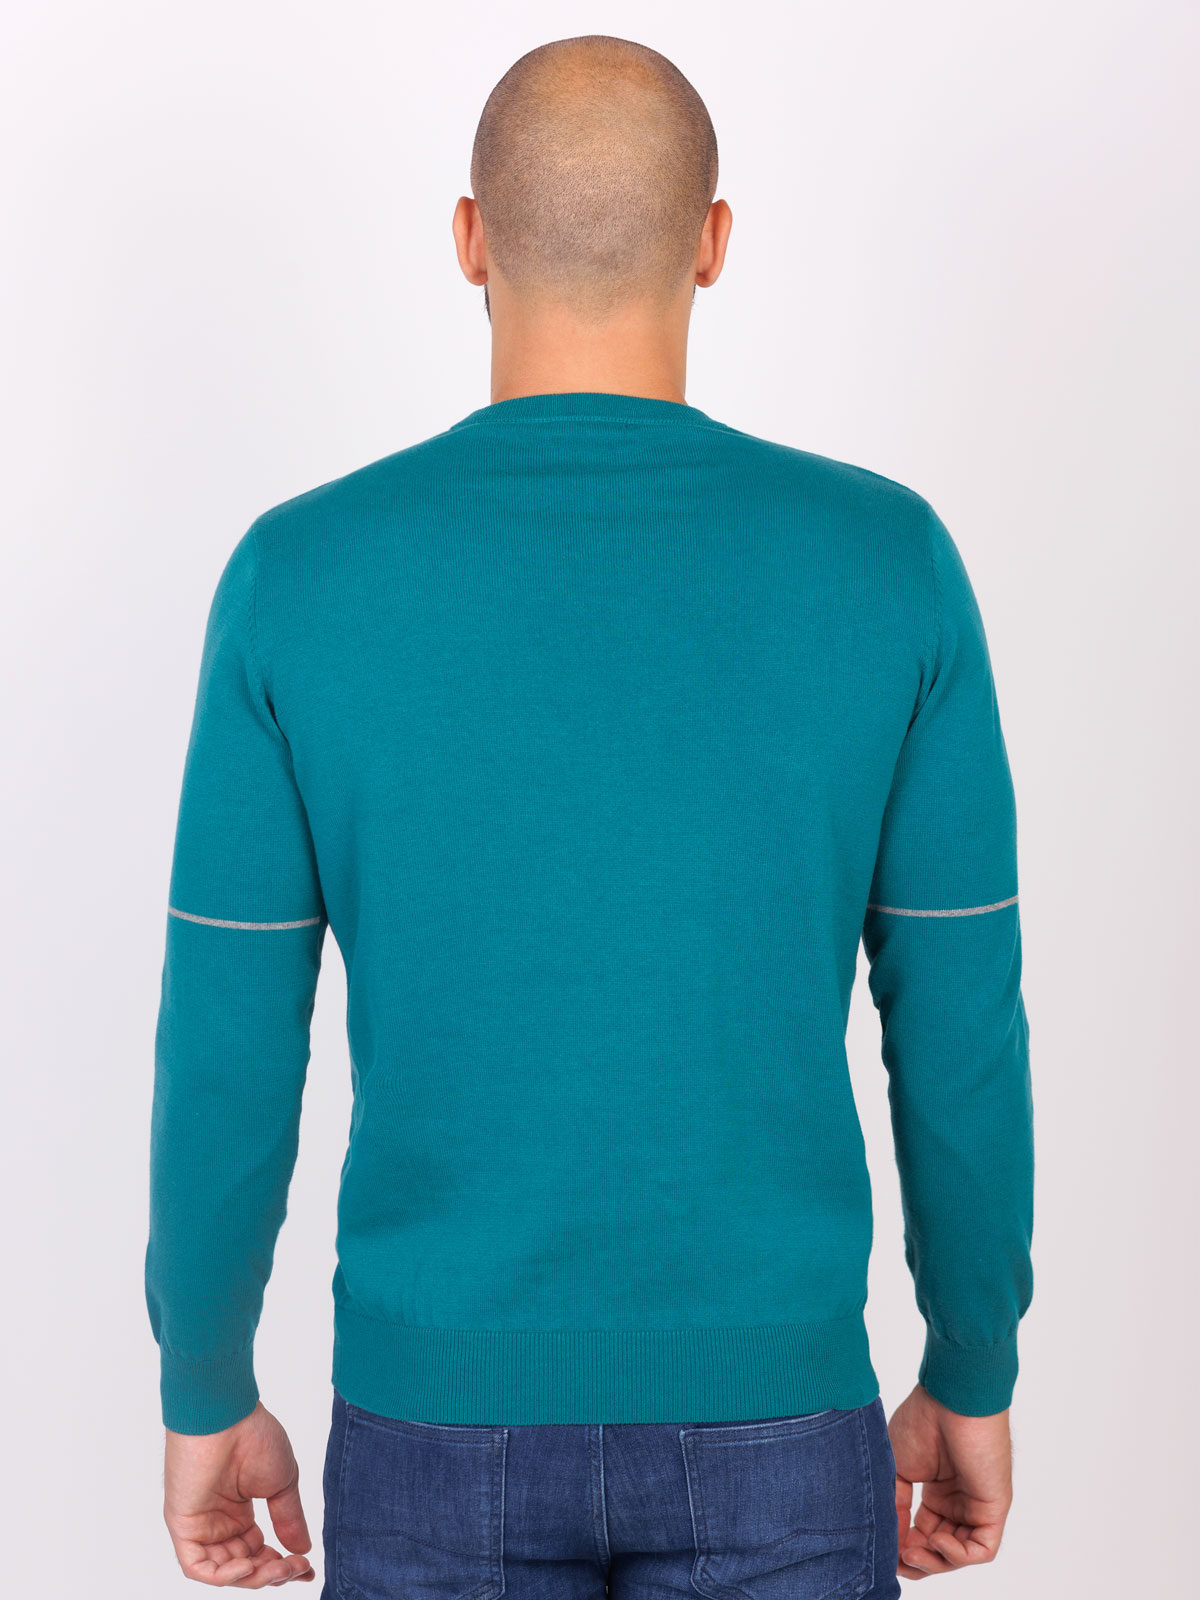 Blouse in turquoise with gray lines - 35310 € 38.81 img2